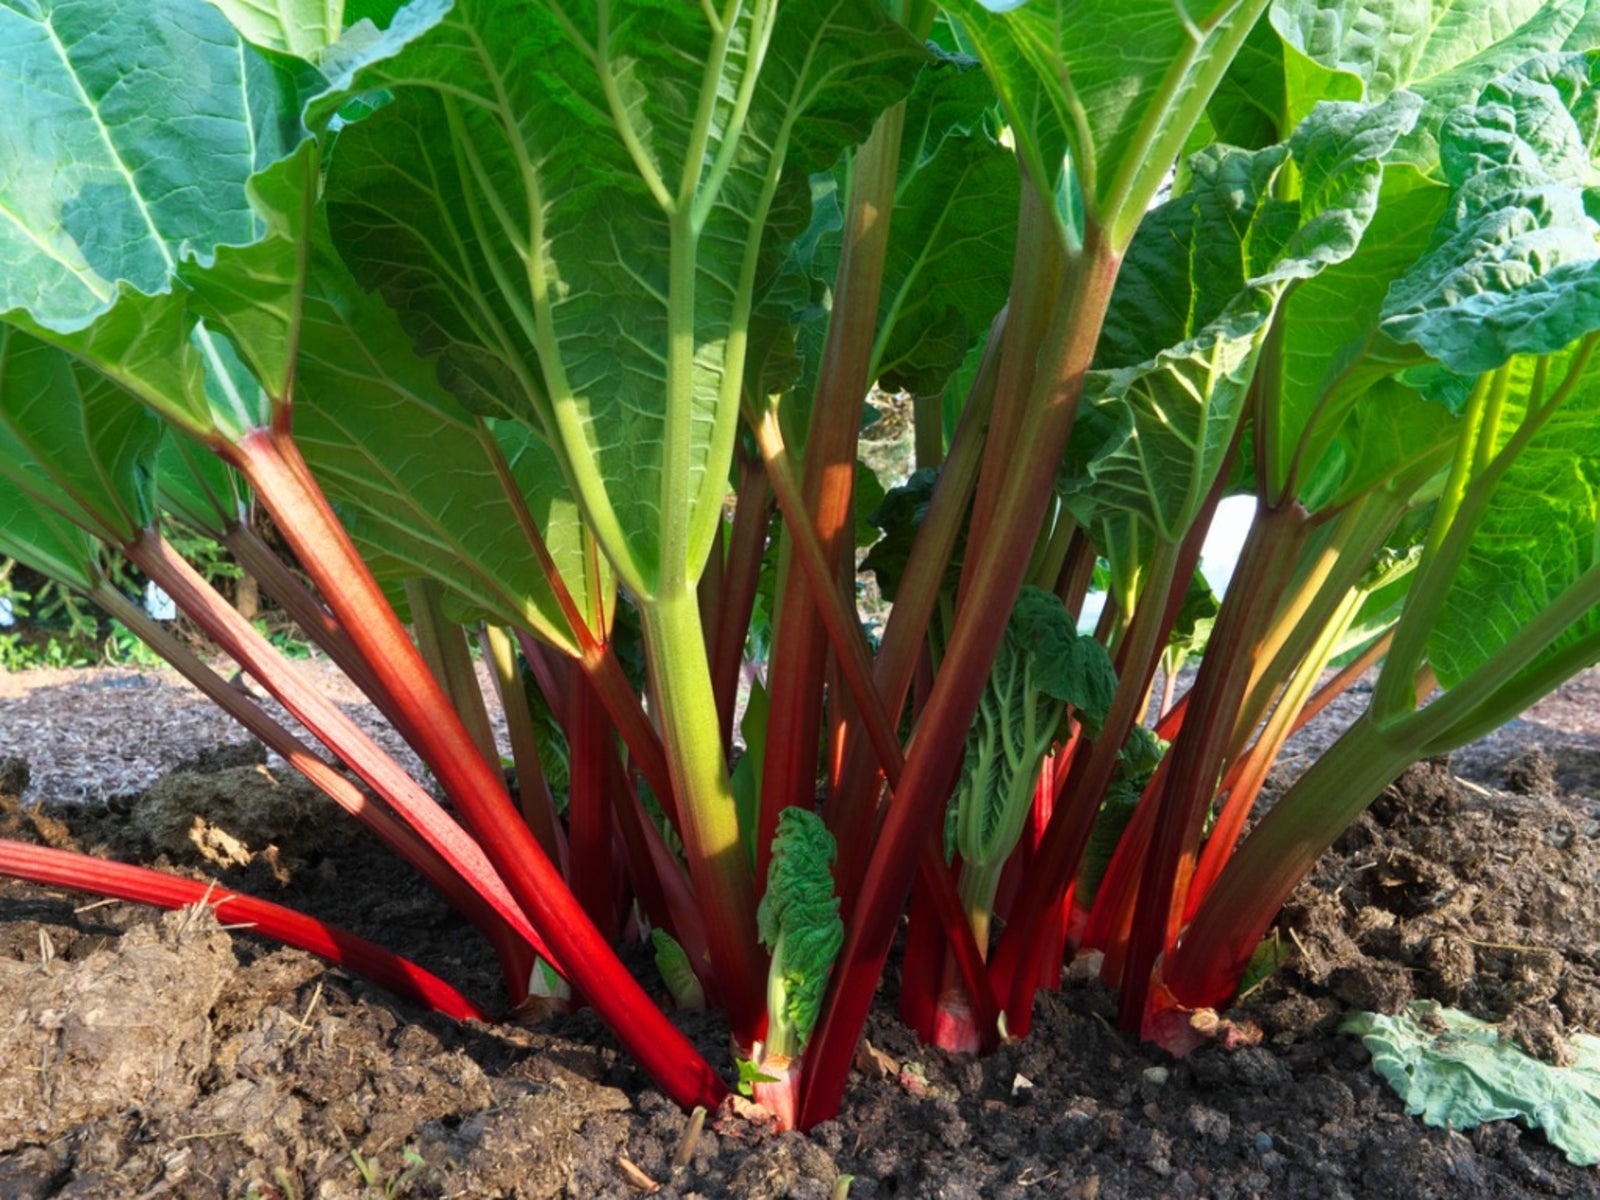 Crimson Cherry Rhubarb - Large Crown Root Division - Rich Flavor, Heavy  Yields, Stays red even when cooked